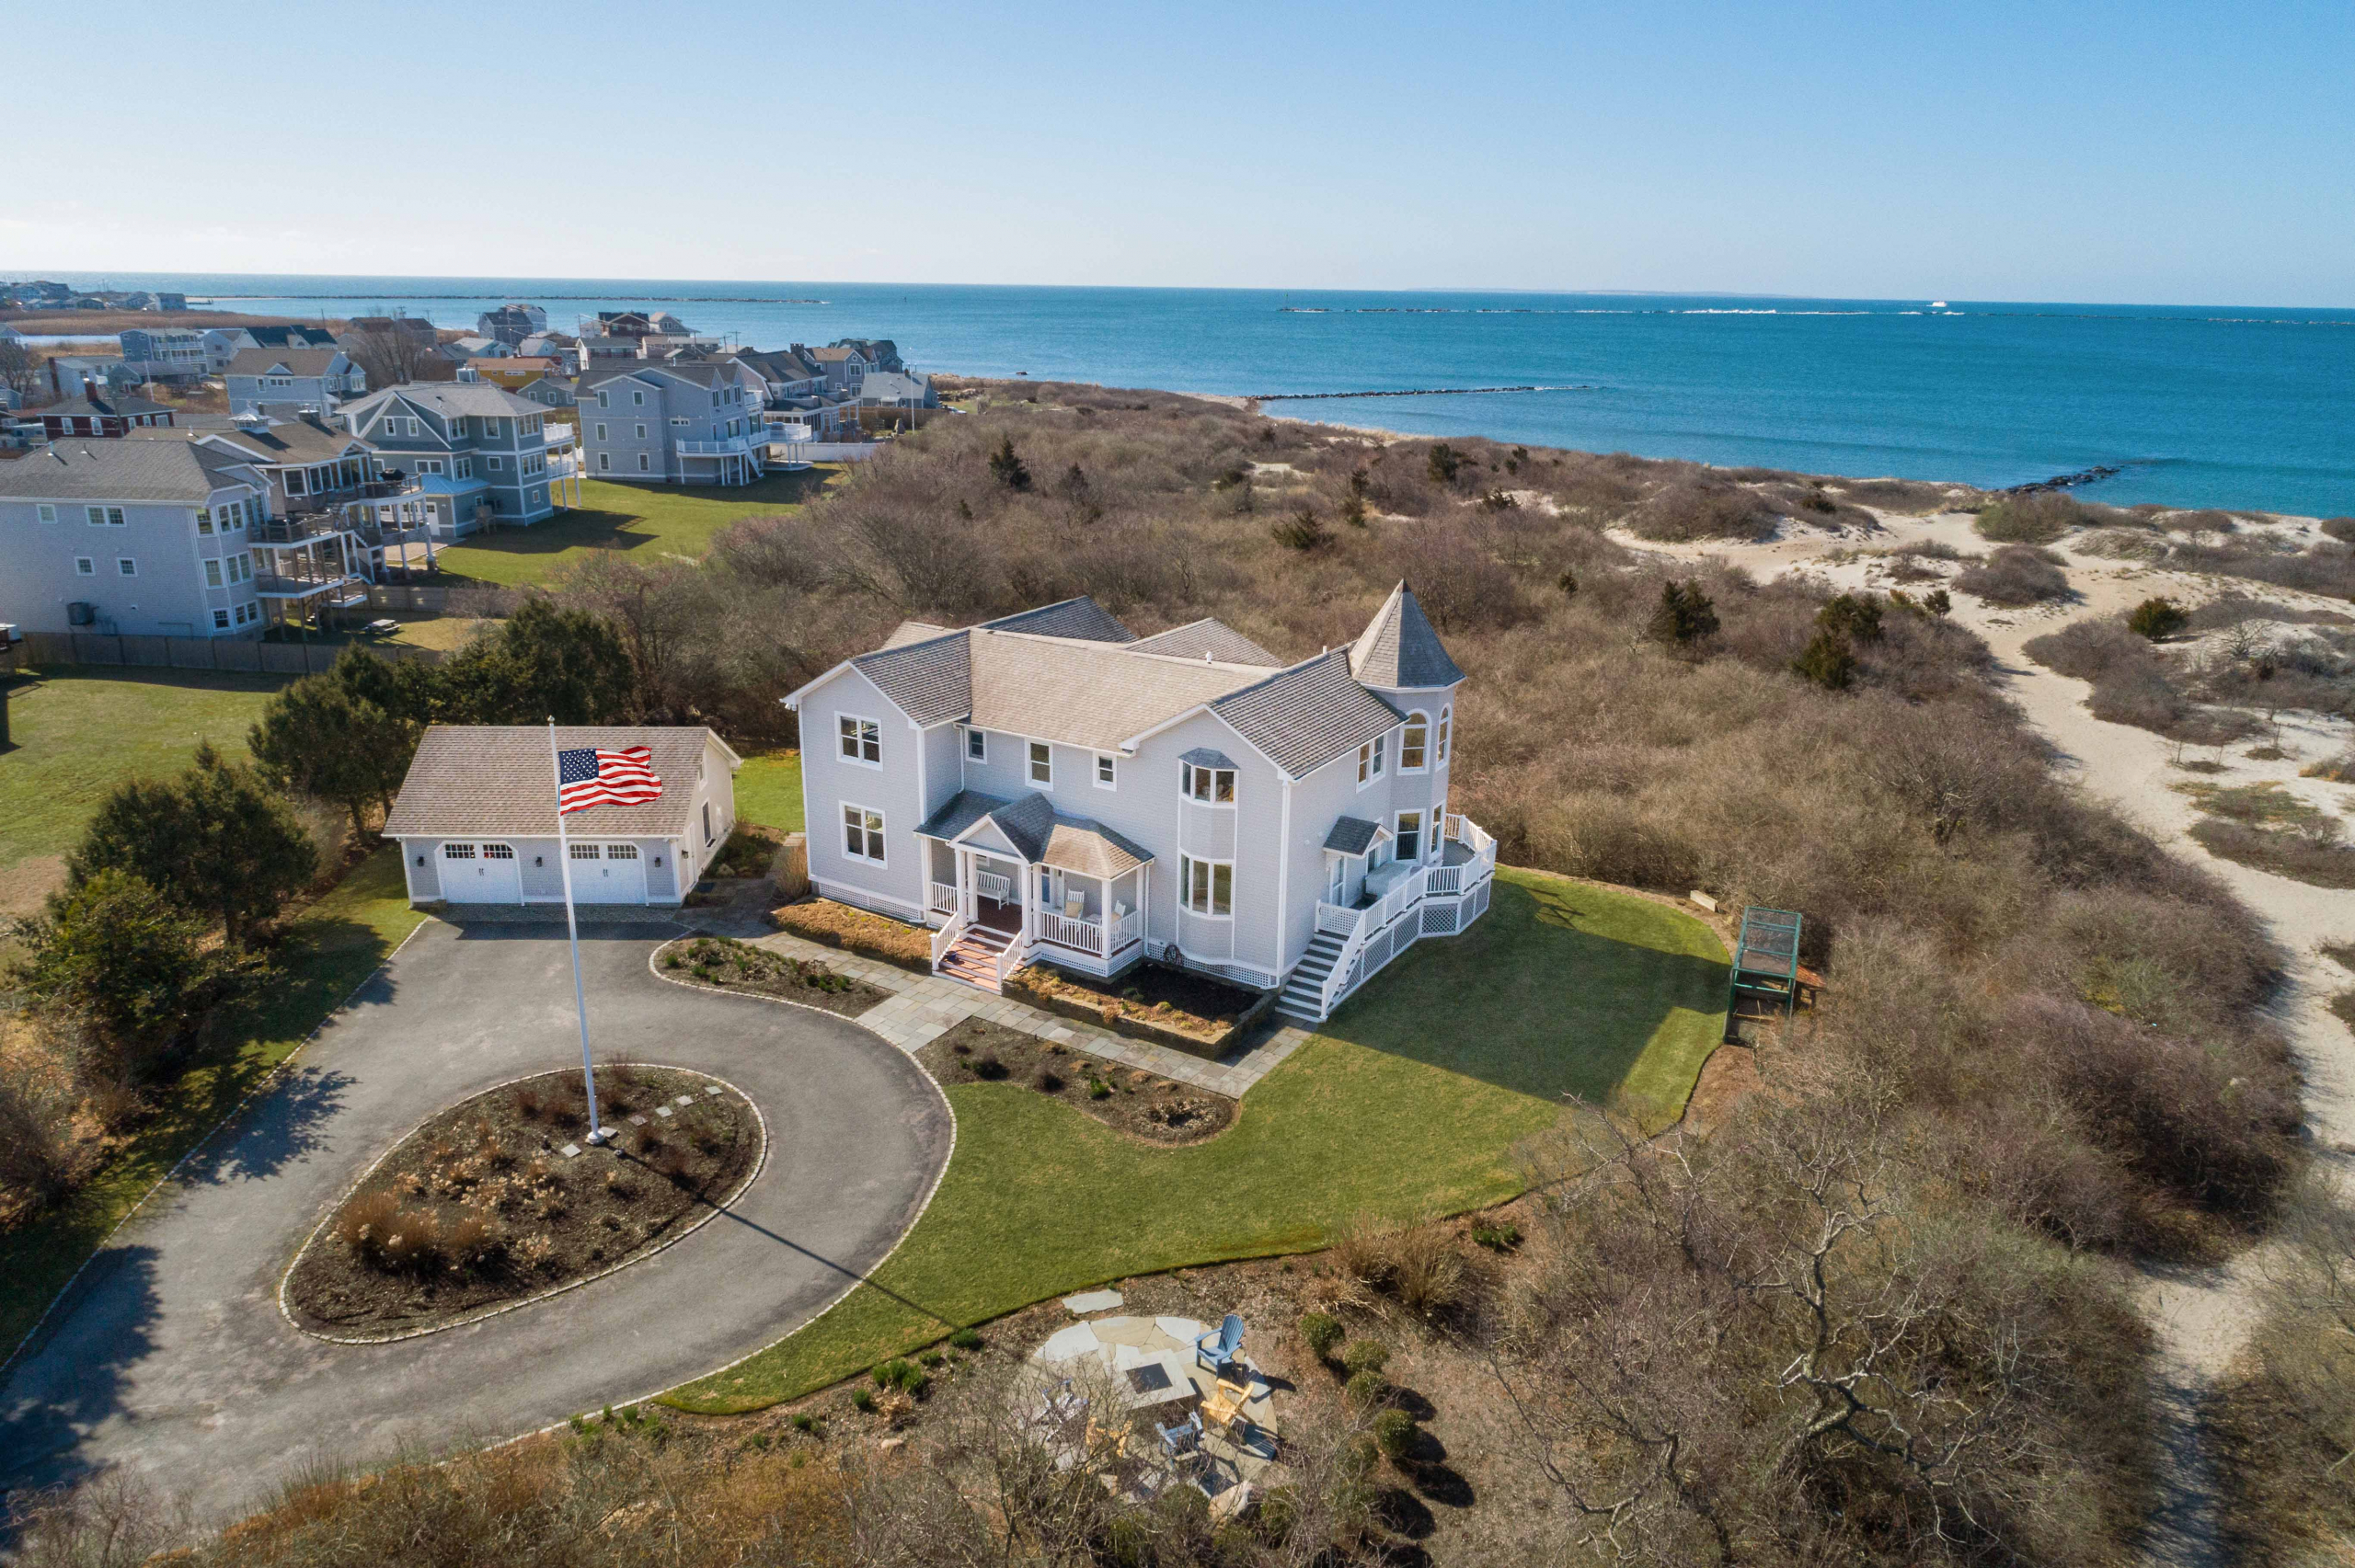 OCEANFRONT BEACH COTTAGE IN NARRAGANSETT SELLS FOR $2,550,000, MARKING HIGHEST SALE IN SAND HILL COVE SINCE 2017*